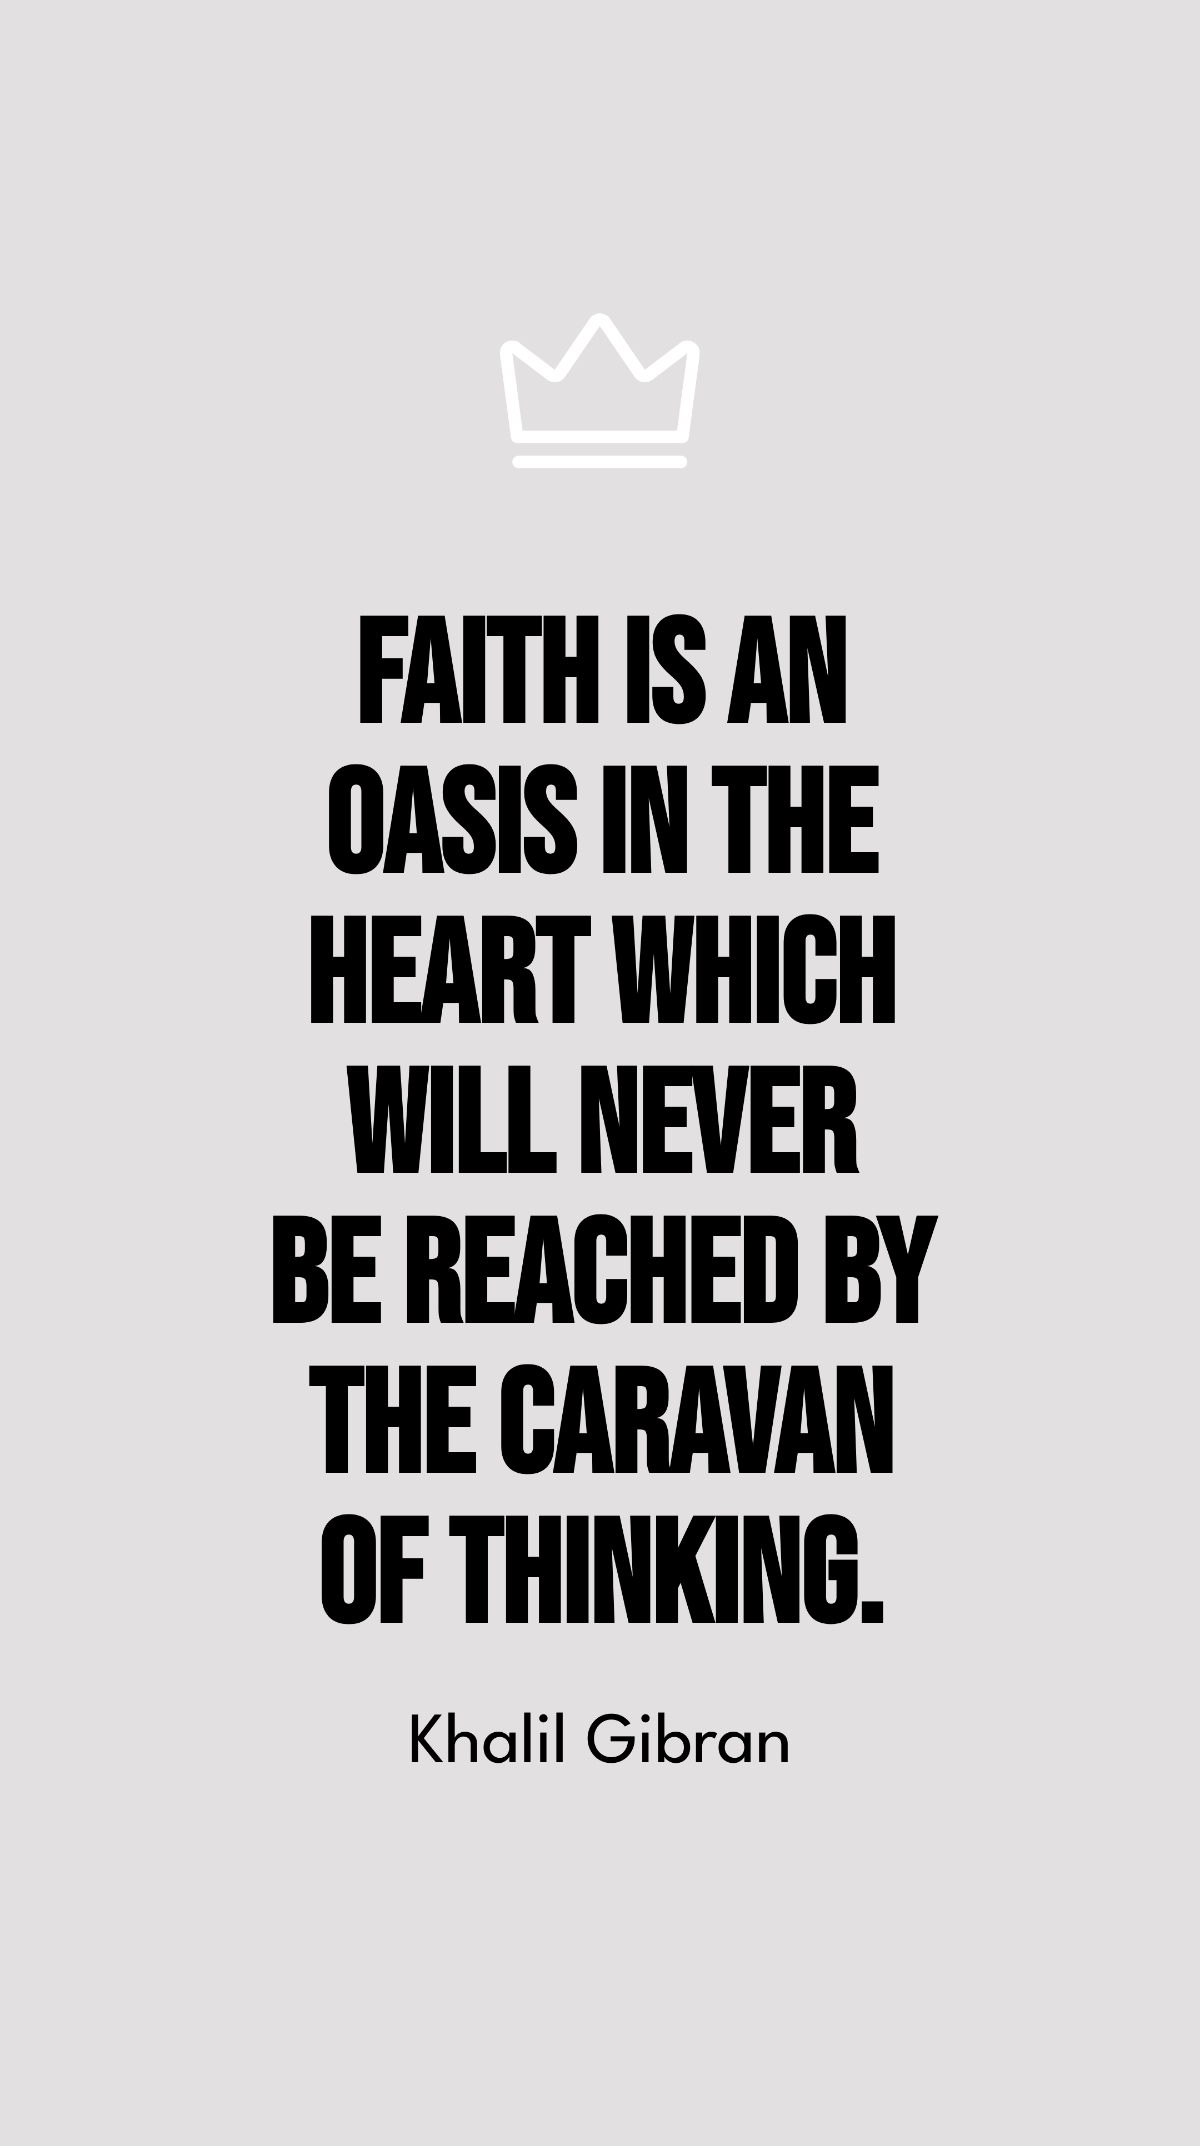 Free Khalil Gibran - Faith is an oasis in the heart which will never be reached by the caravan of thinking. Template